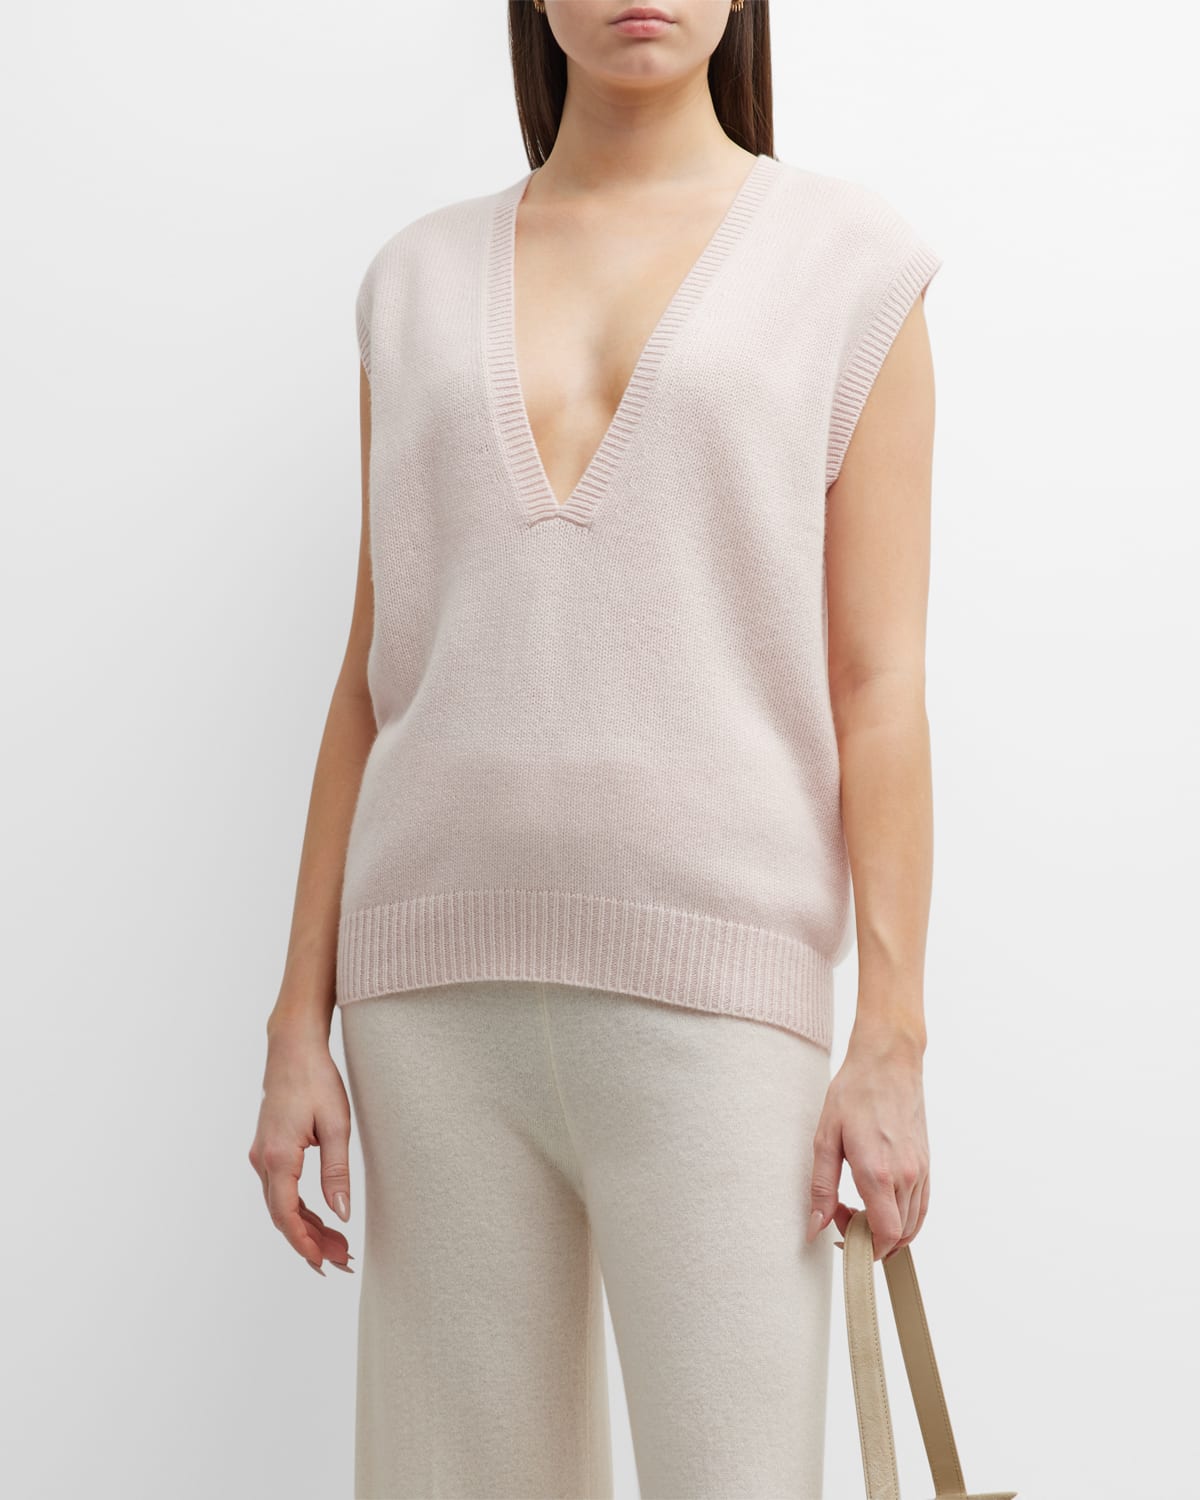 Ling Cashmere Sleeveless Sweater Vest